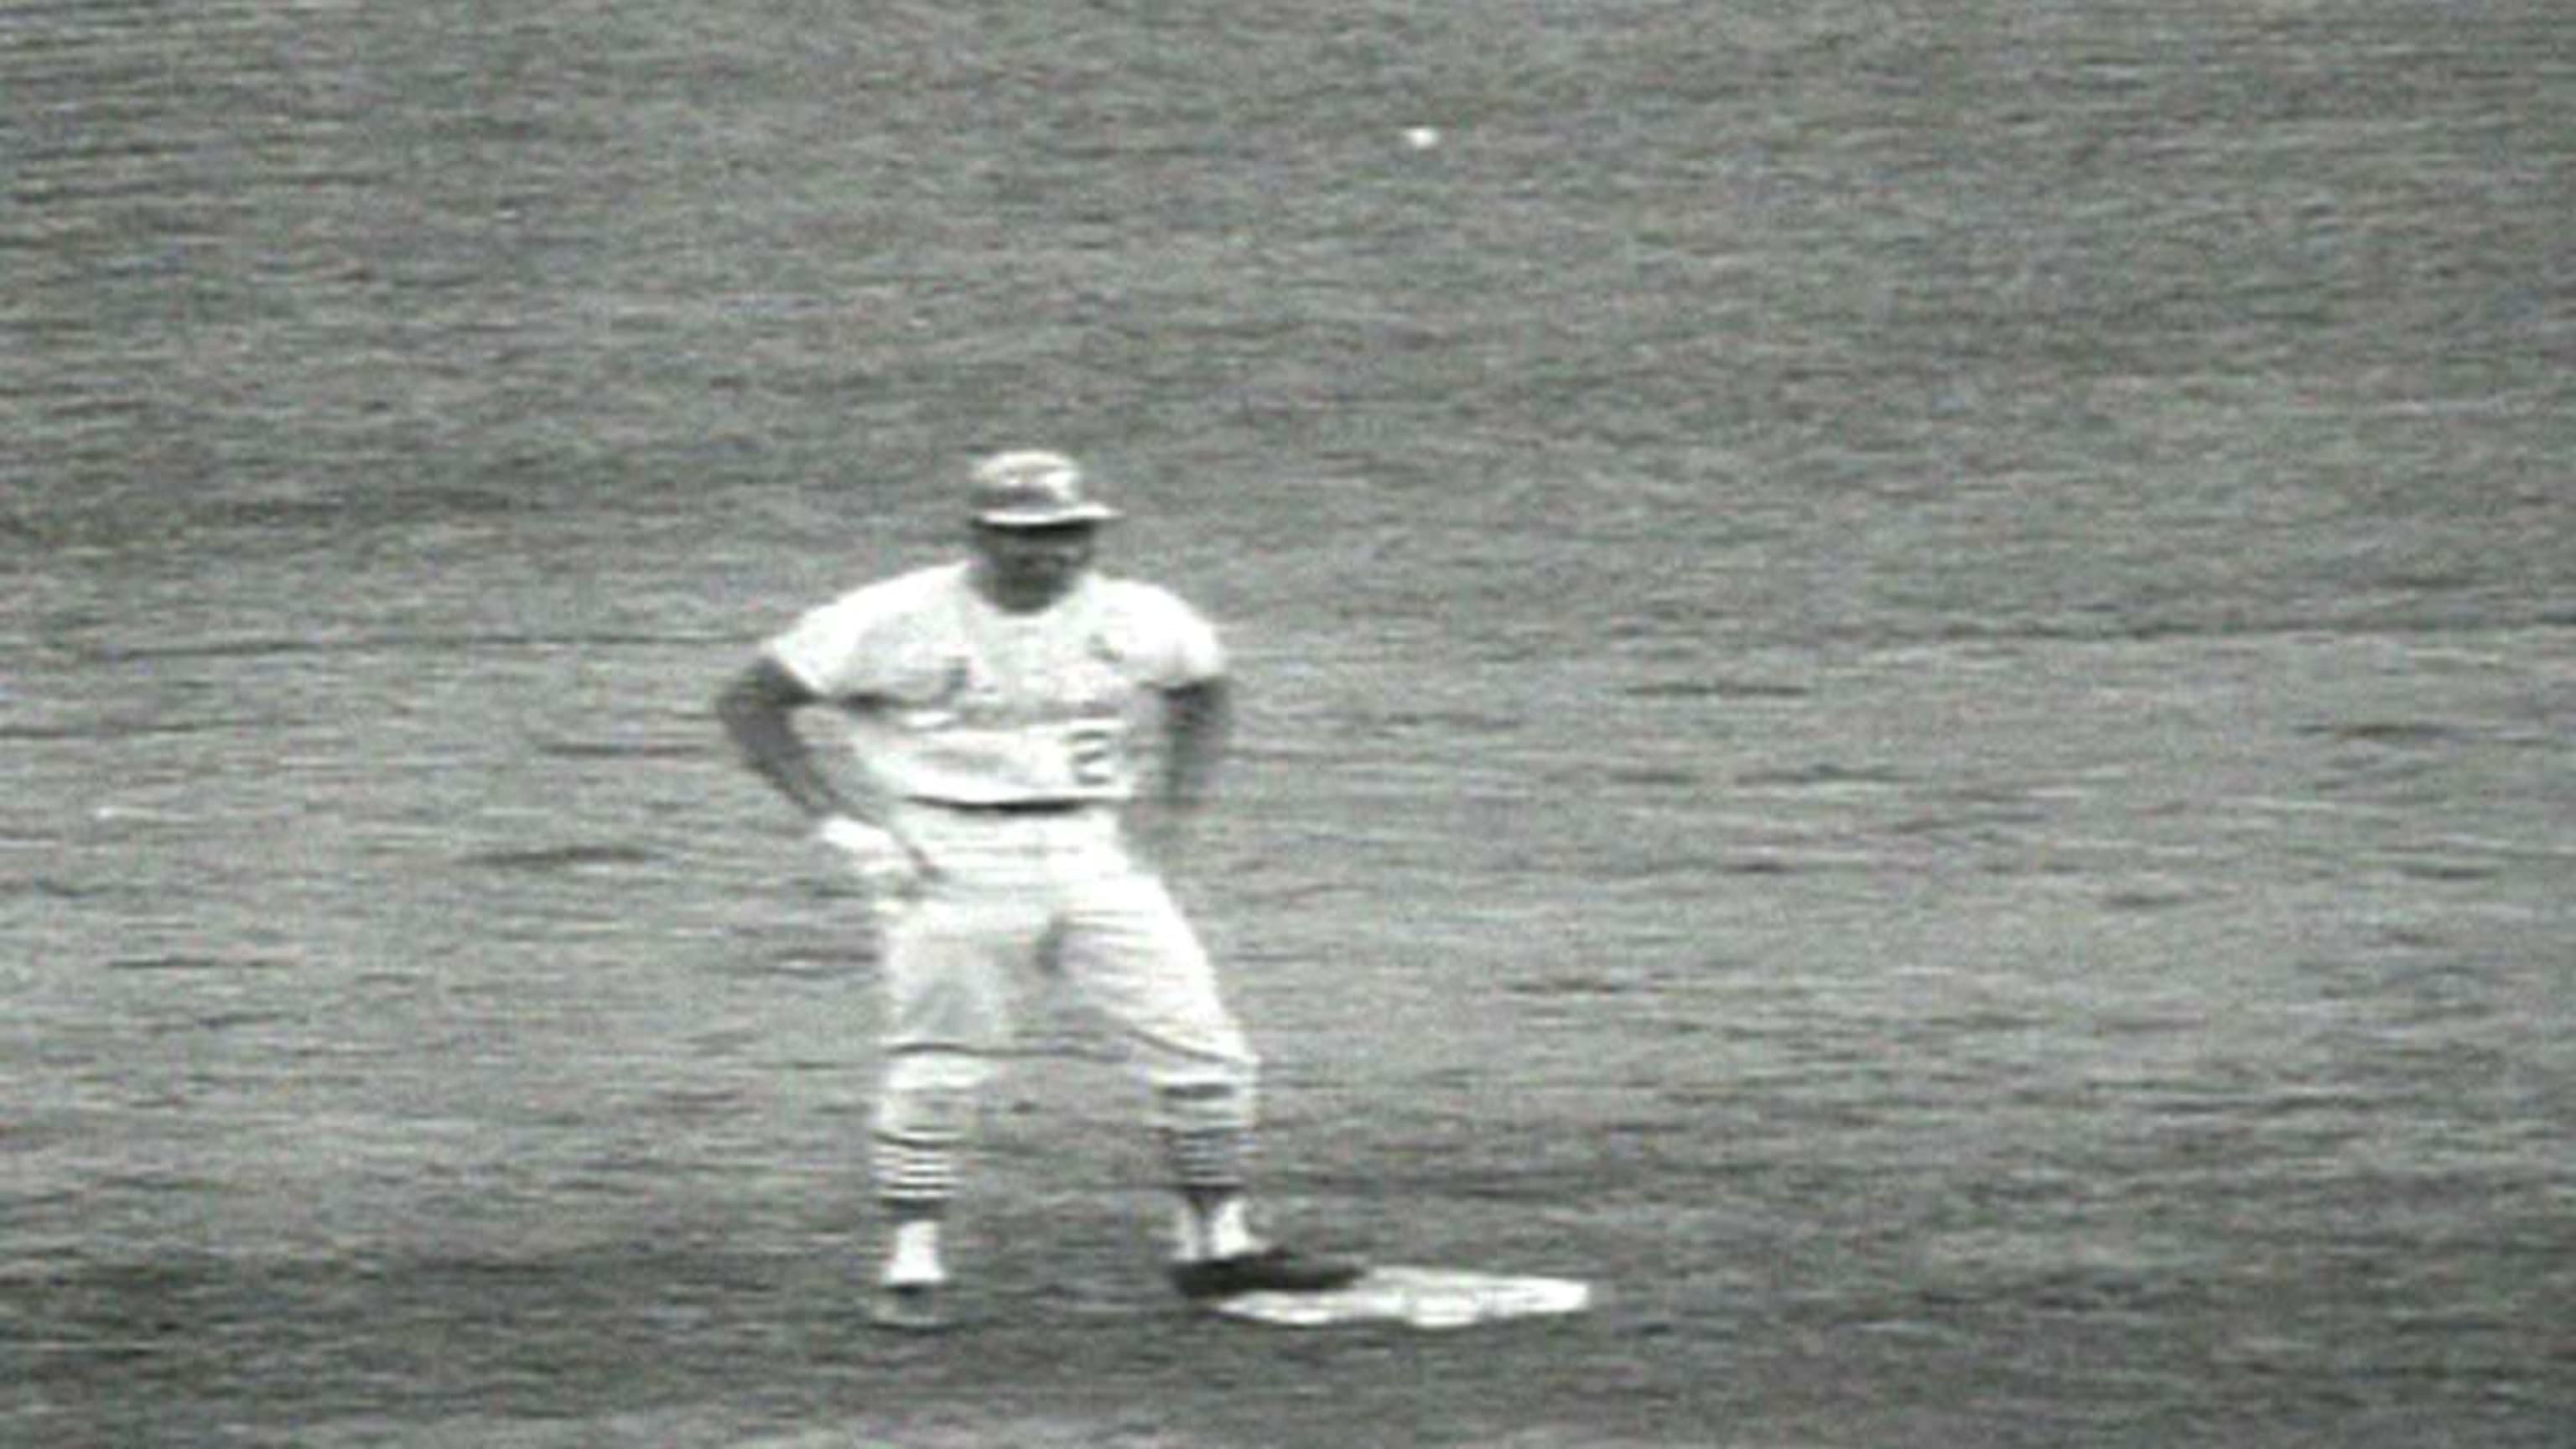 On this date in 1968, the Tigers came to bat in Game 1 of the World Series.  Their bats weren't much use, though, as Bob Gibson struck out…